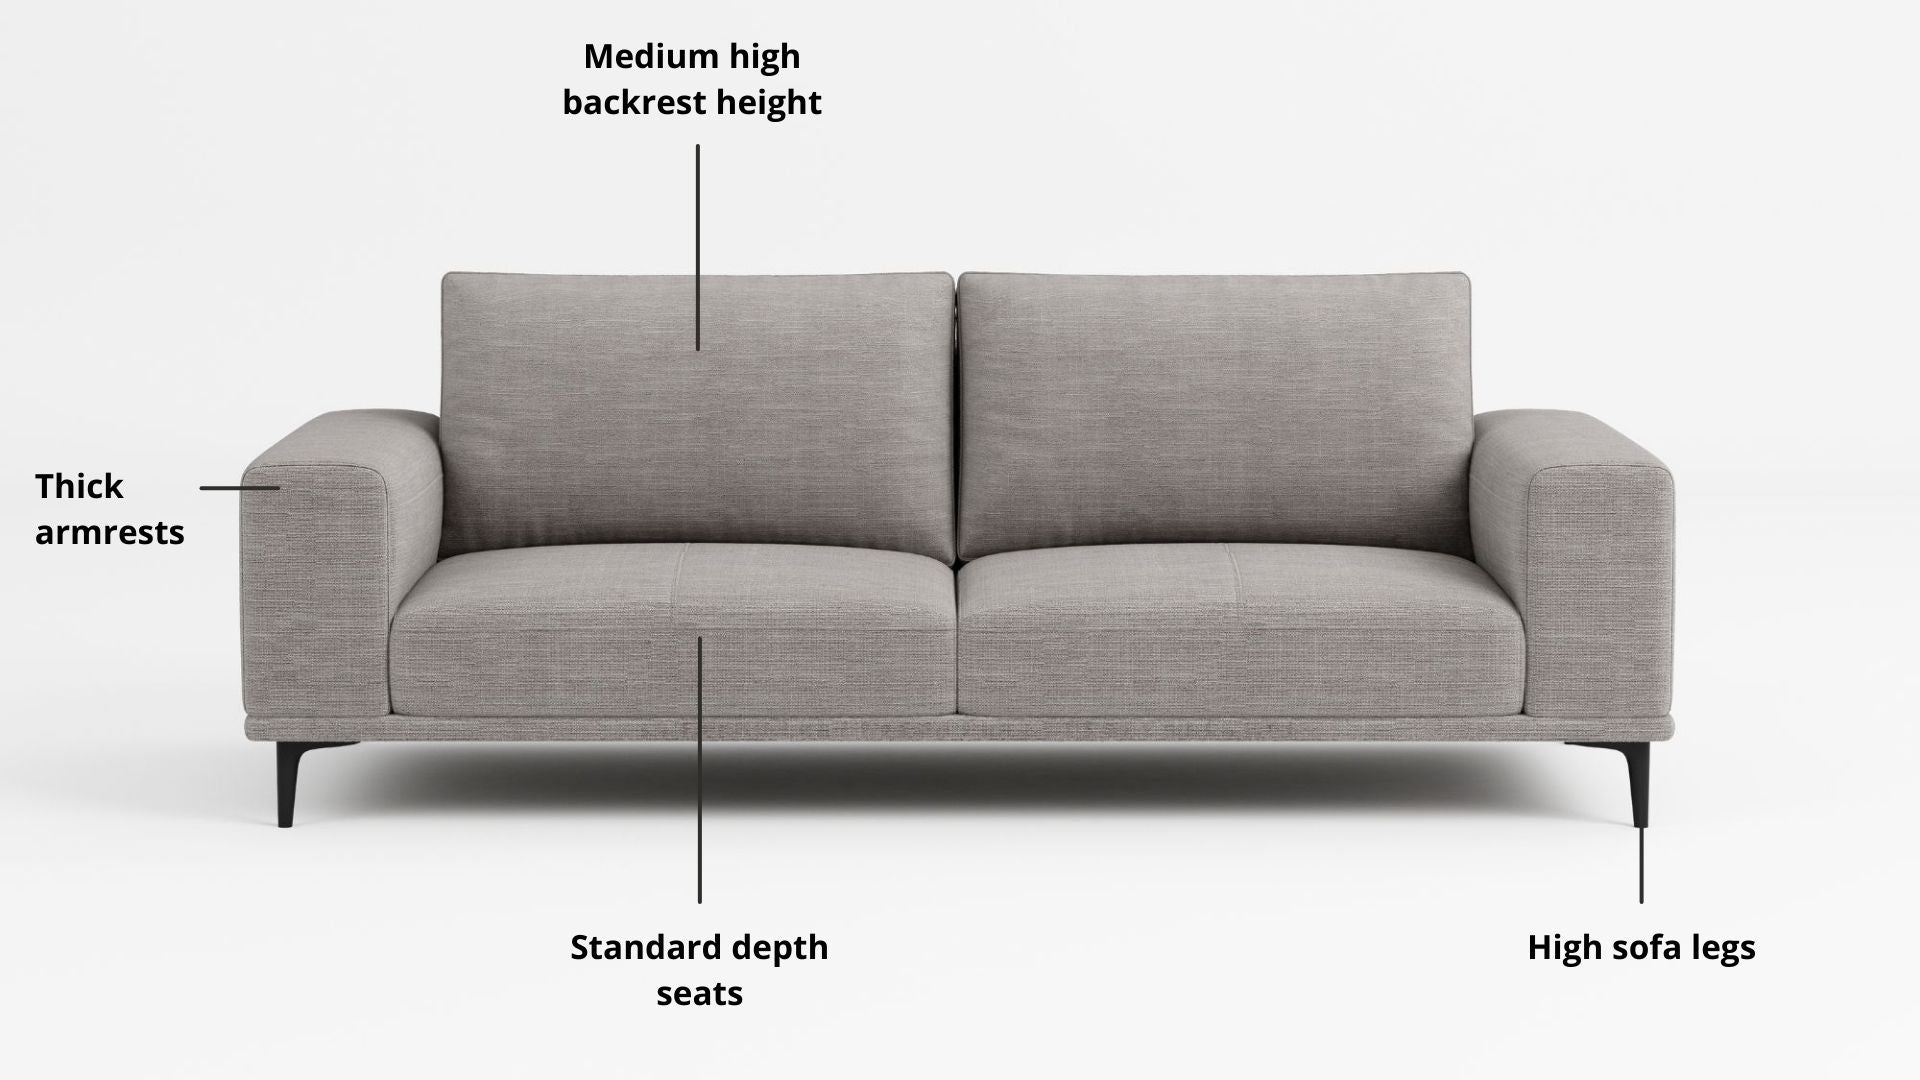 Key features such as armrest thickness, cushion height, seat depth and sofa leg height for Calm Fabric Sofa